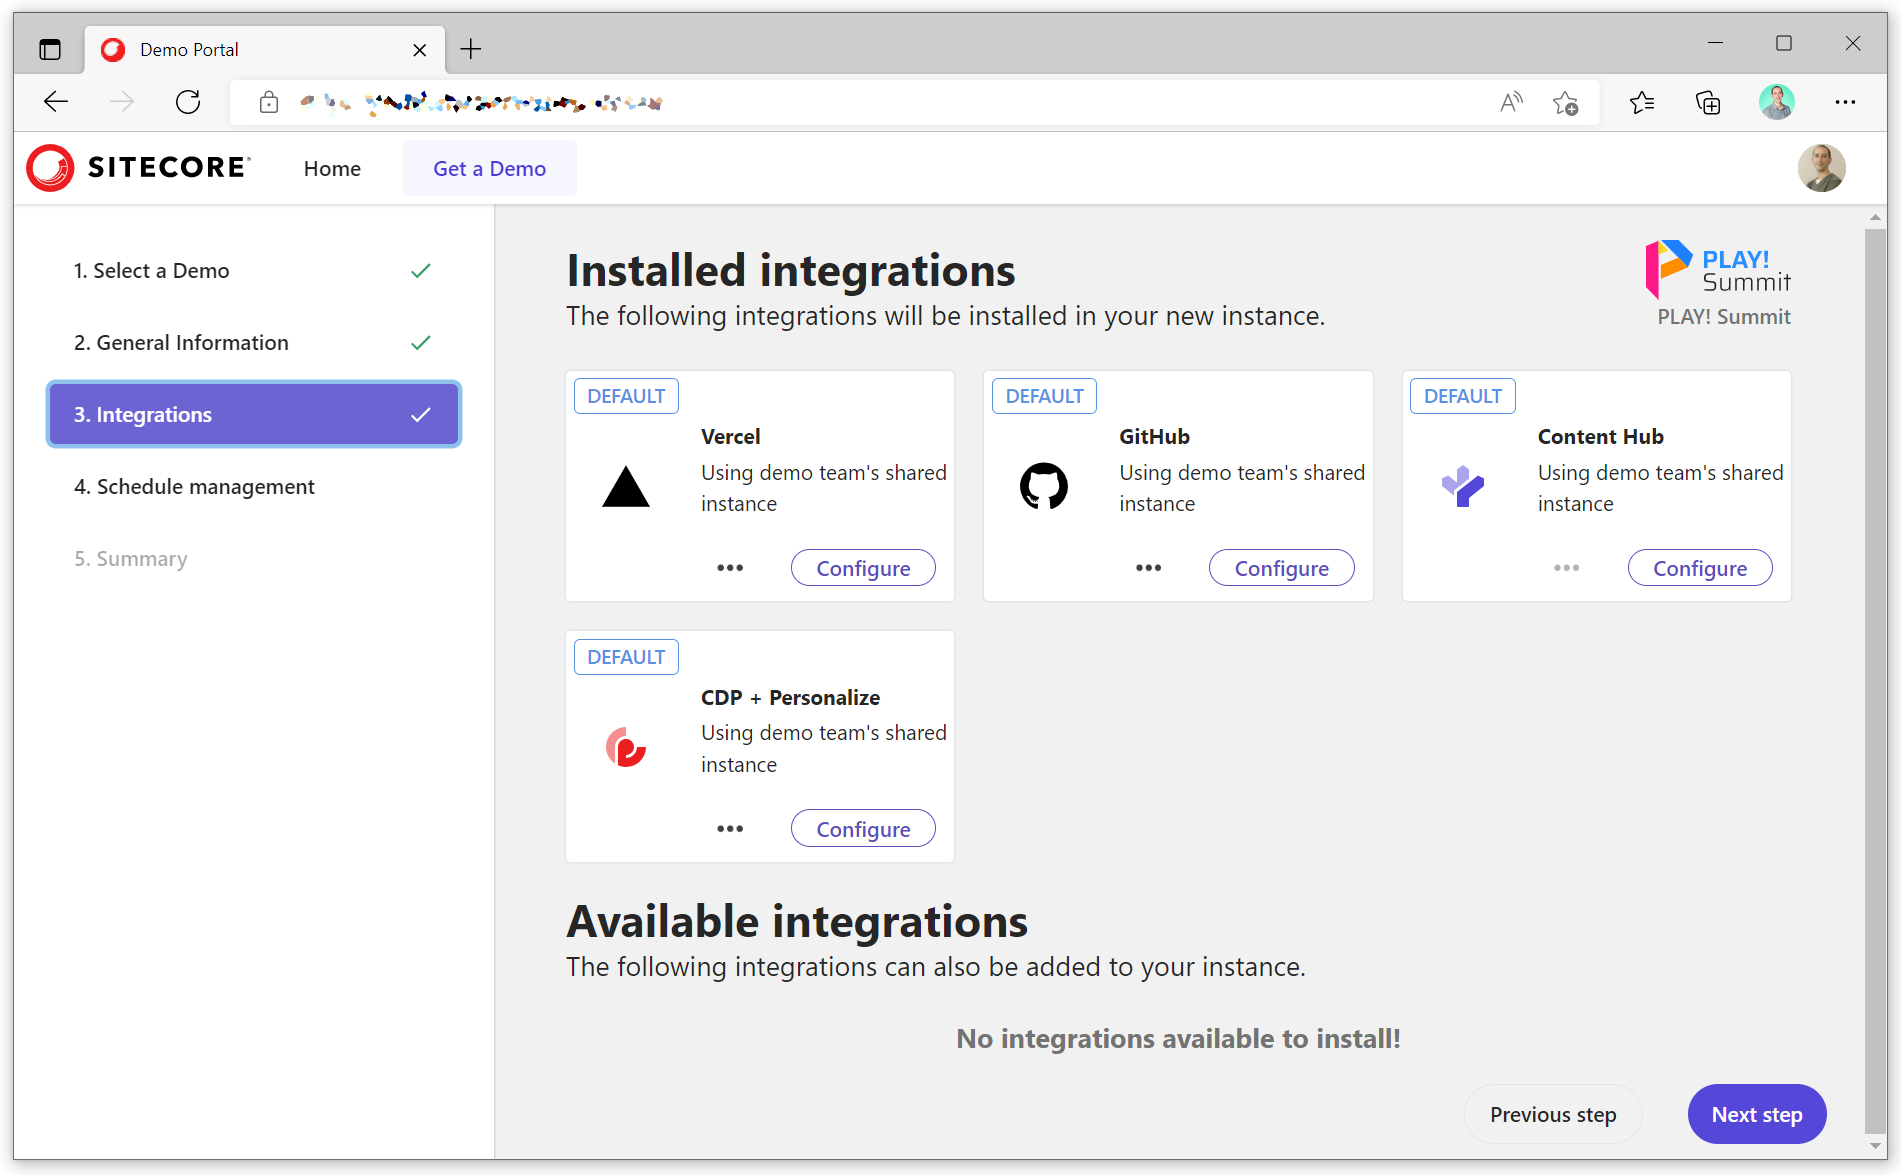 The dialog for adding integrations to your instance